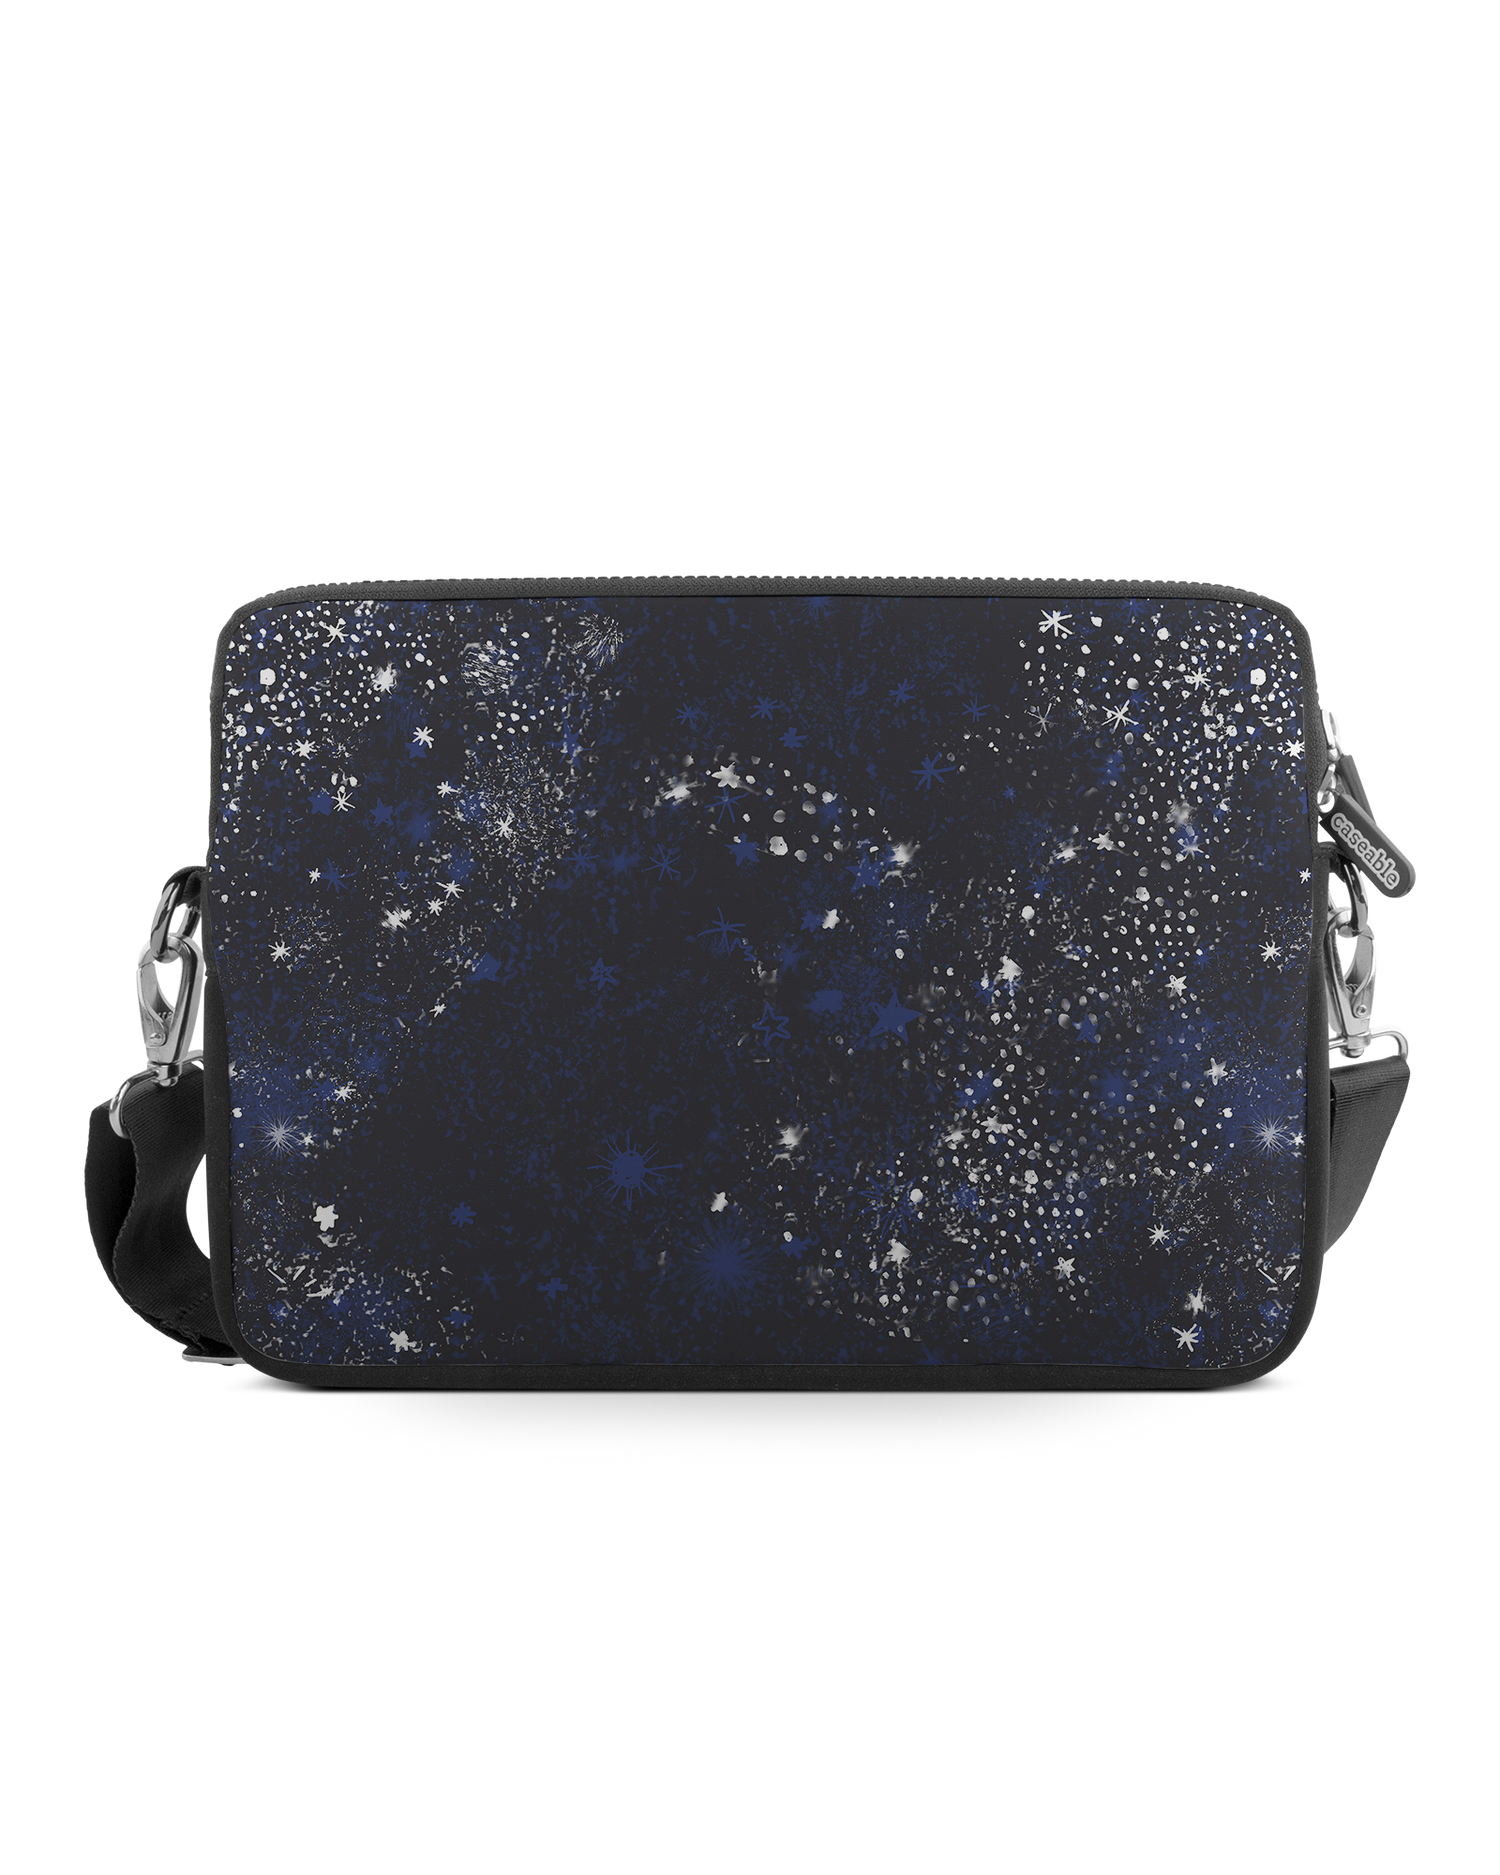 Starry Night Sky Premium Laptop Bag 13 inch: Front View